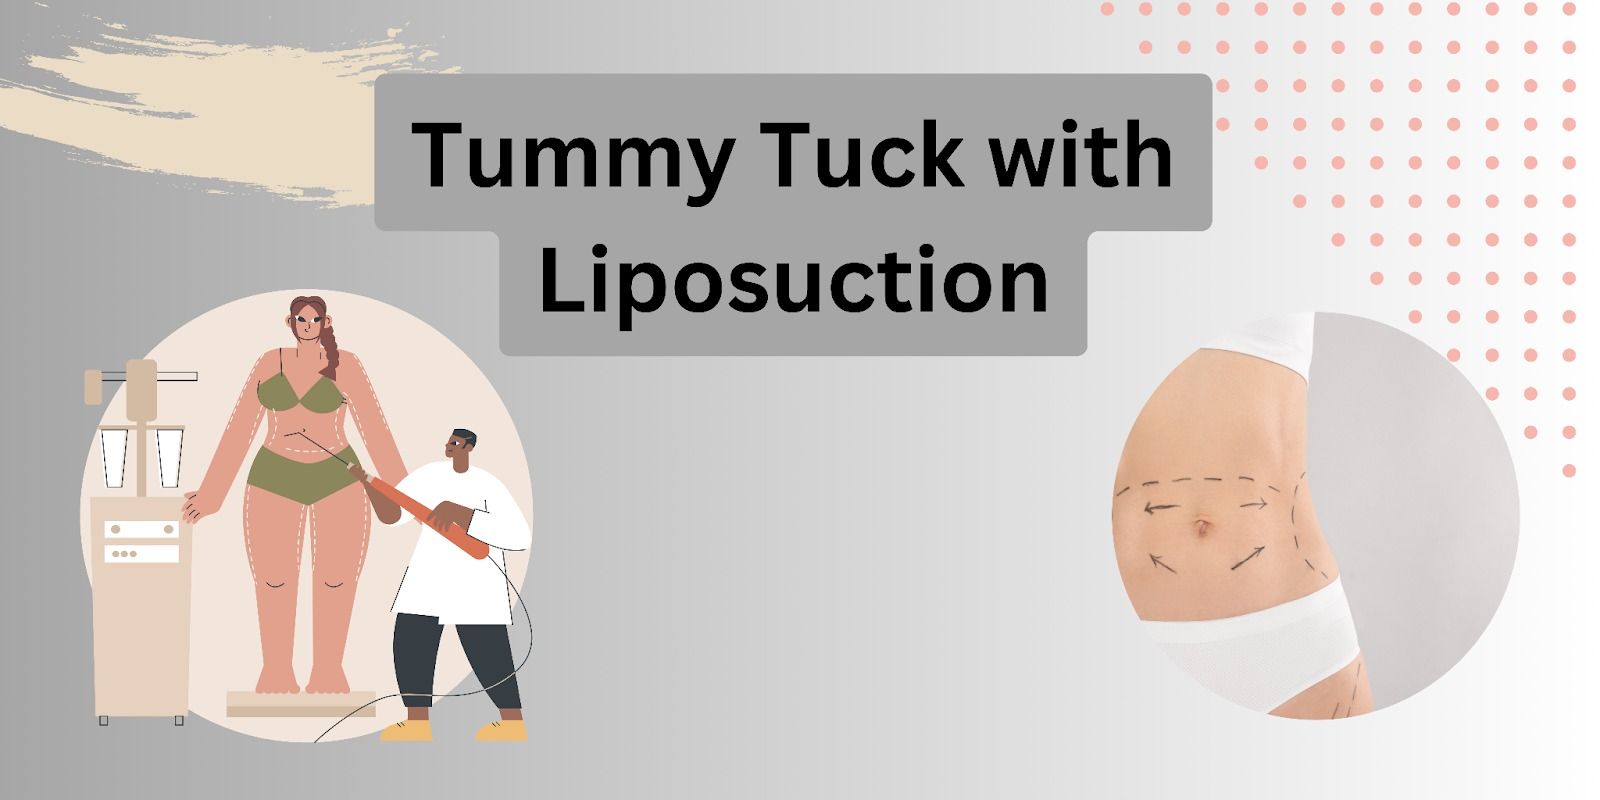 Mini Tummy Tuck Surgery Service at best price in Ahmedabad